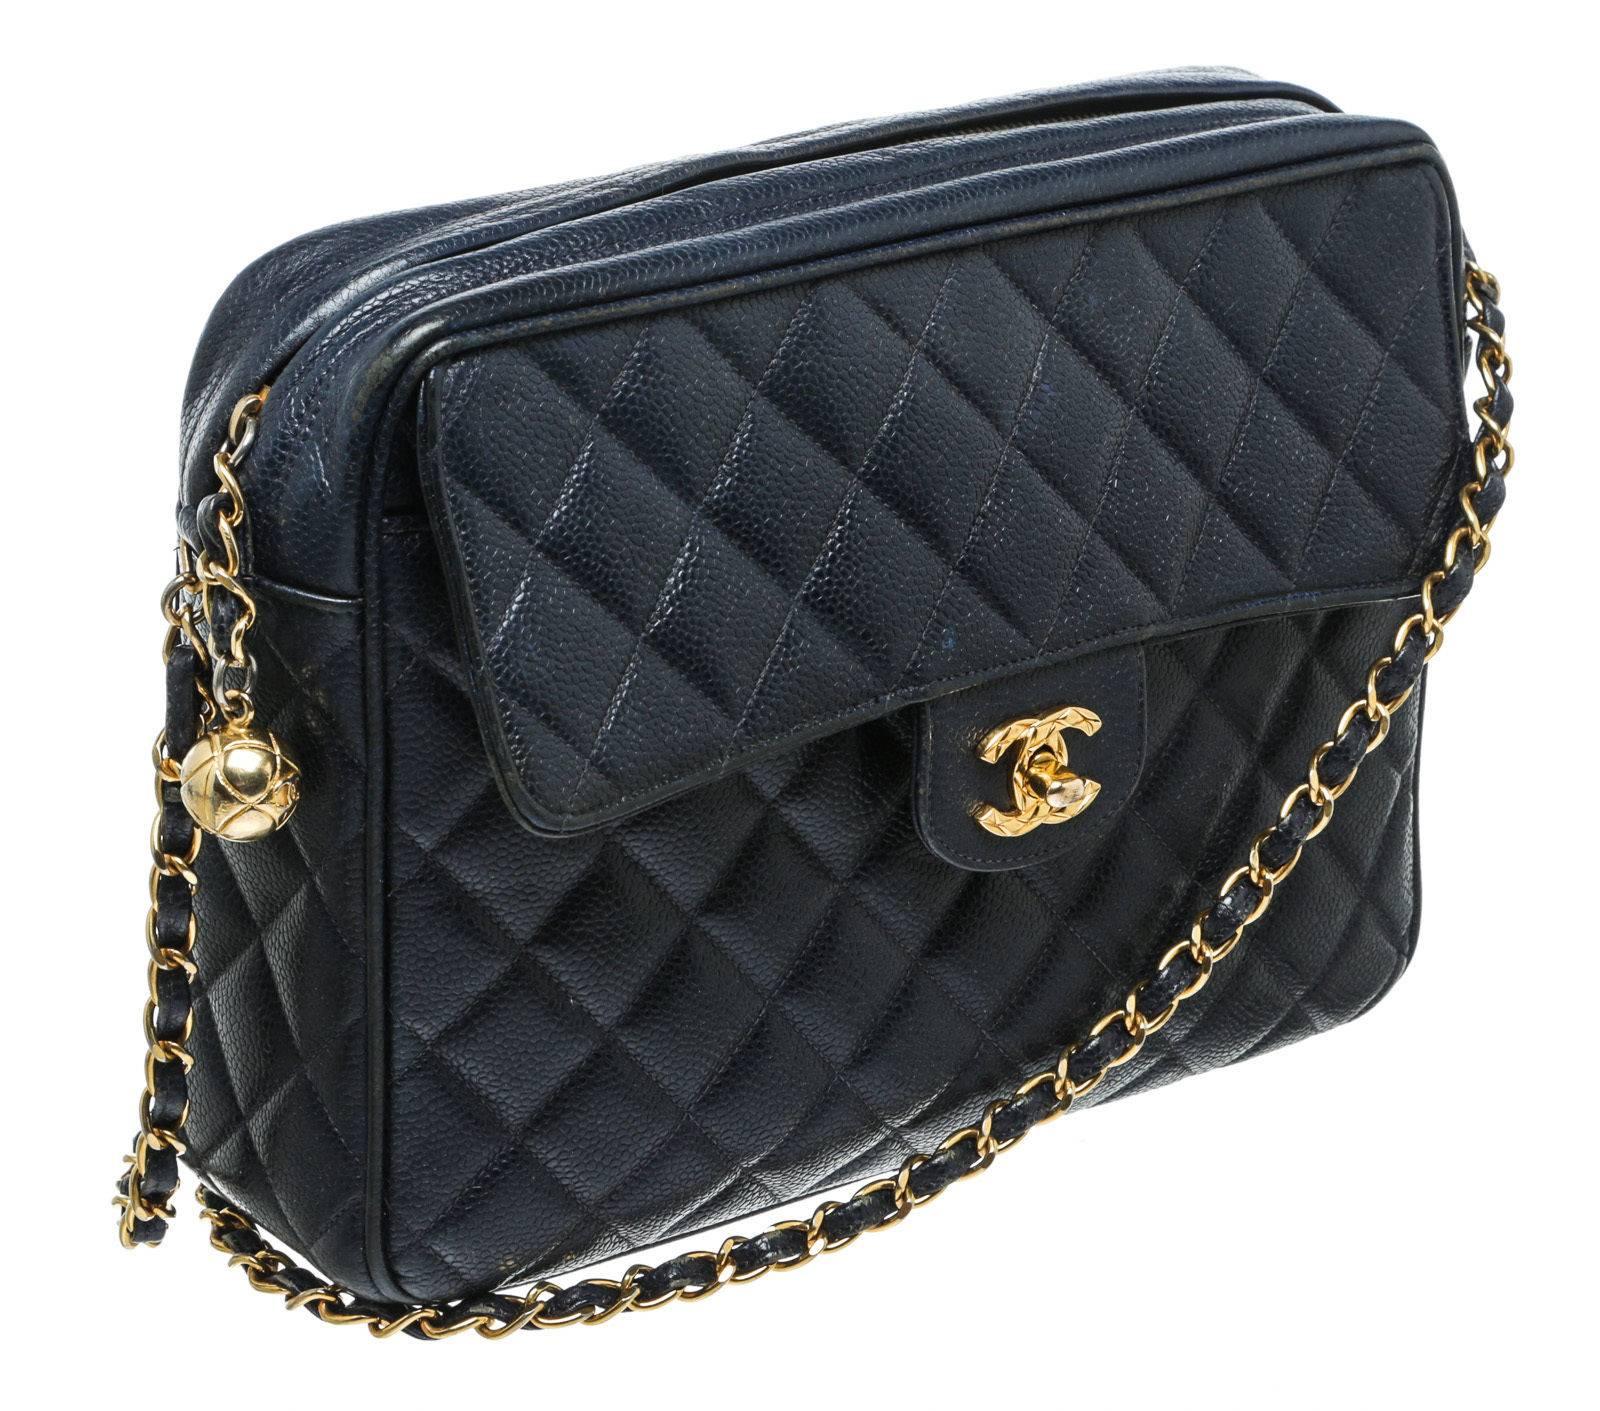 Designer: Chanel
Type: 
Handbag
Condition: 
Exterior: Pre-owned in very good condition - scruffs on hardware/trim wear
Interior: Pre-owned in very good condition - minor wear/minor marks
Color: 
Navy
Material: 
Caviar Leather
Dimensions: